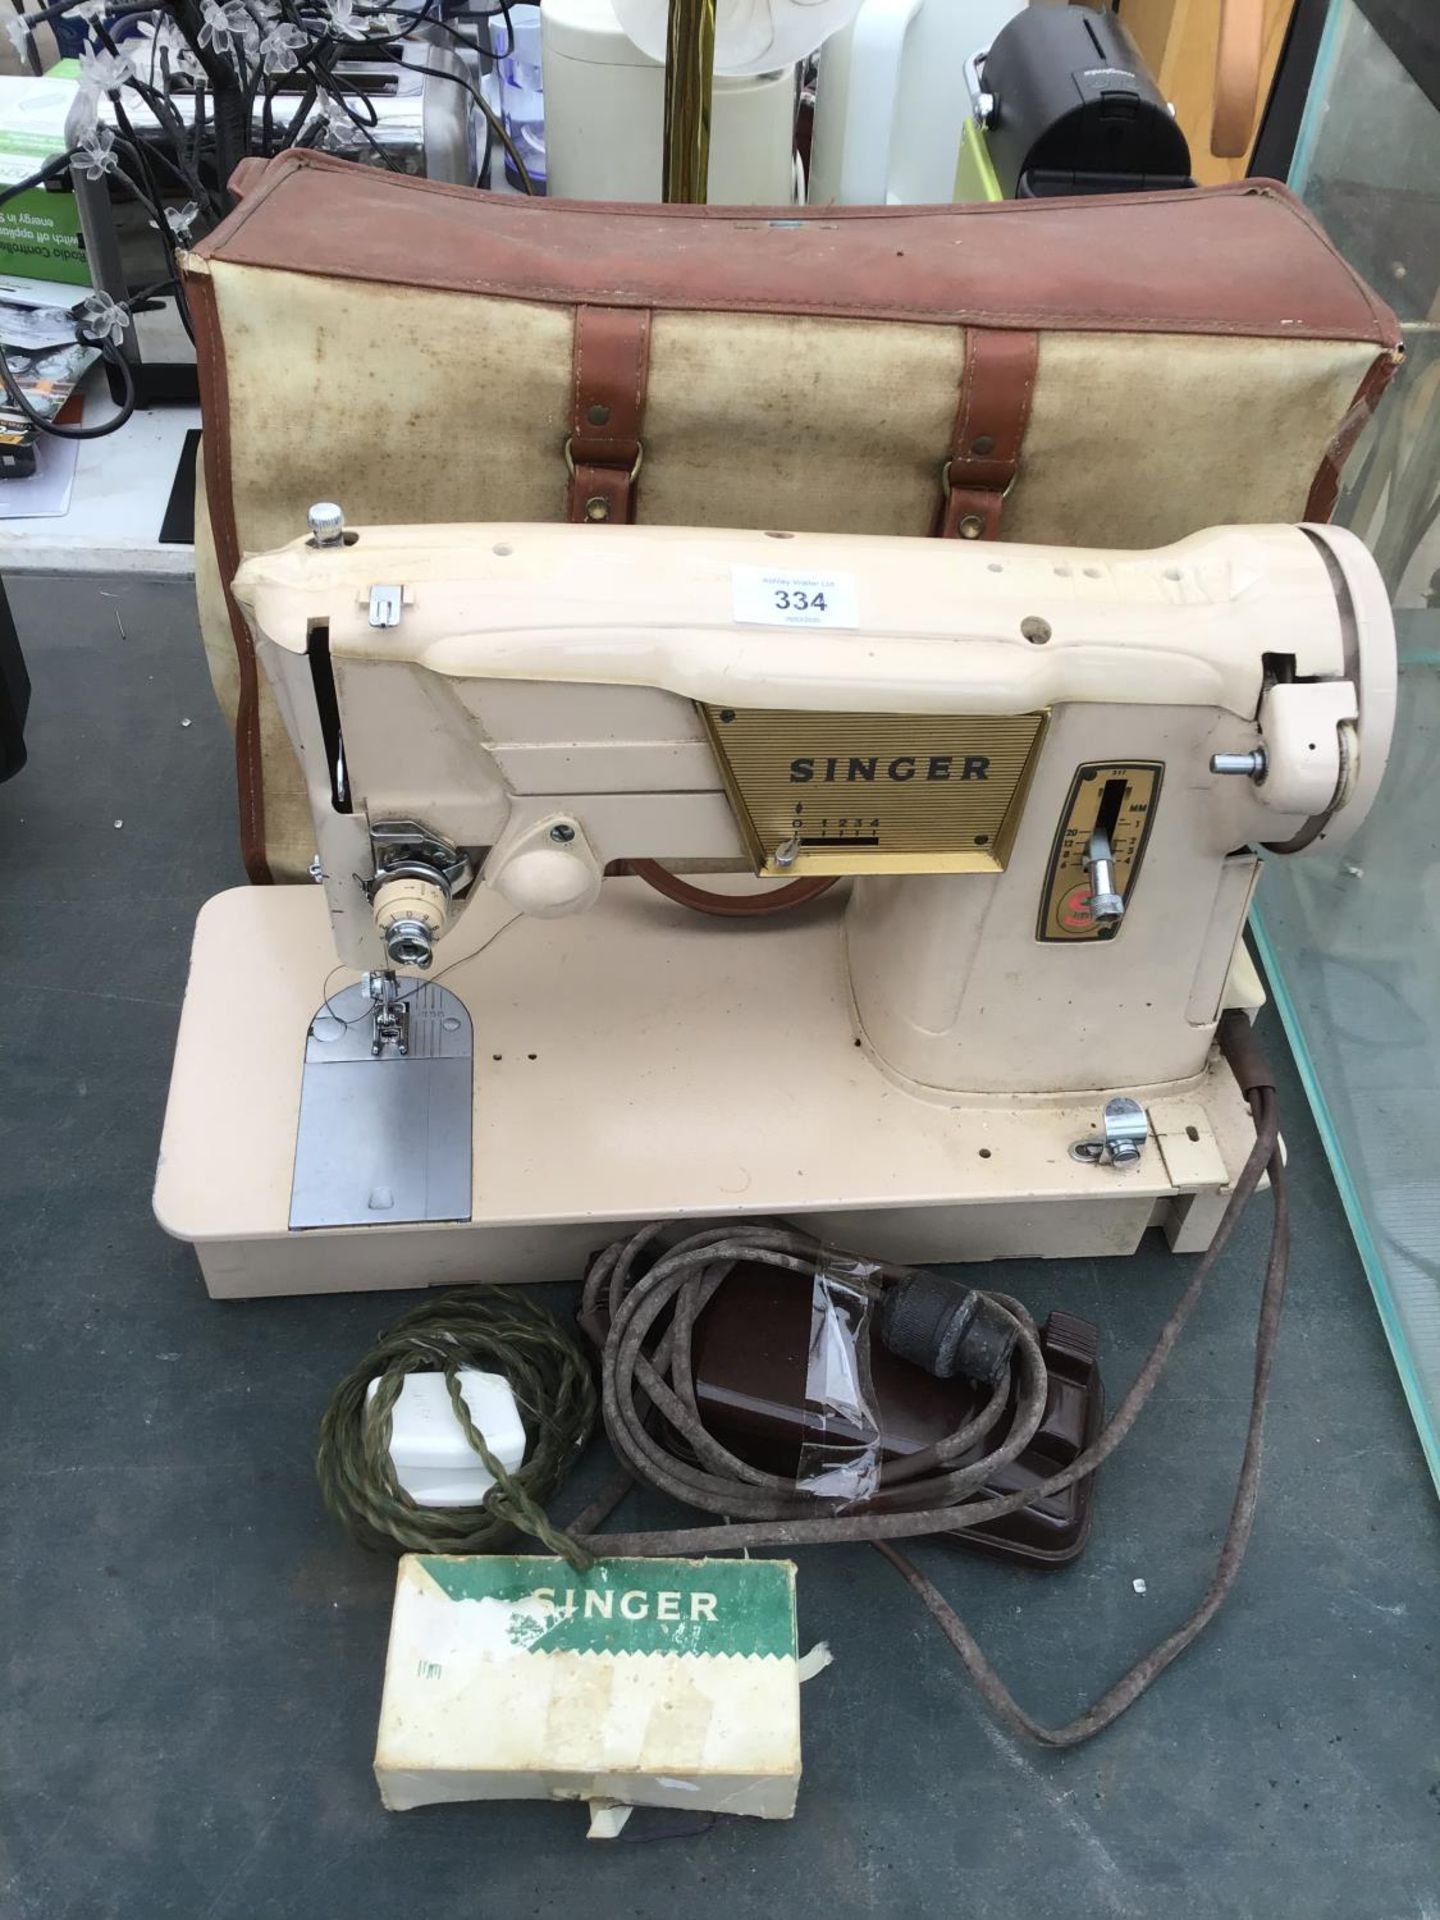 A VINTAGE SINGER SEWING MACHINE WITH CASE, PEDAL AND ATTACHMENTS